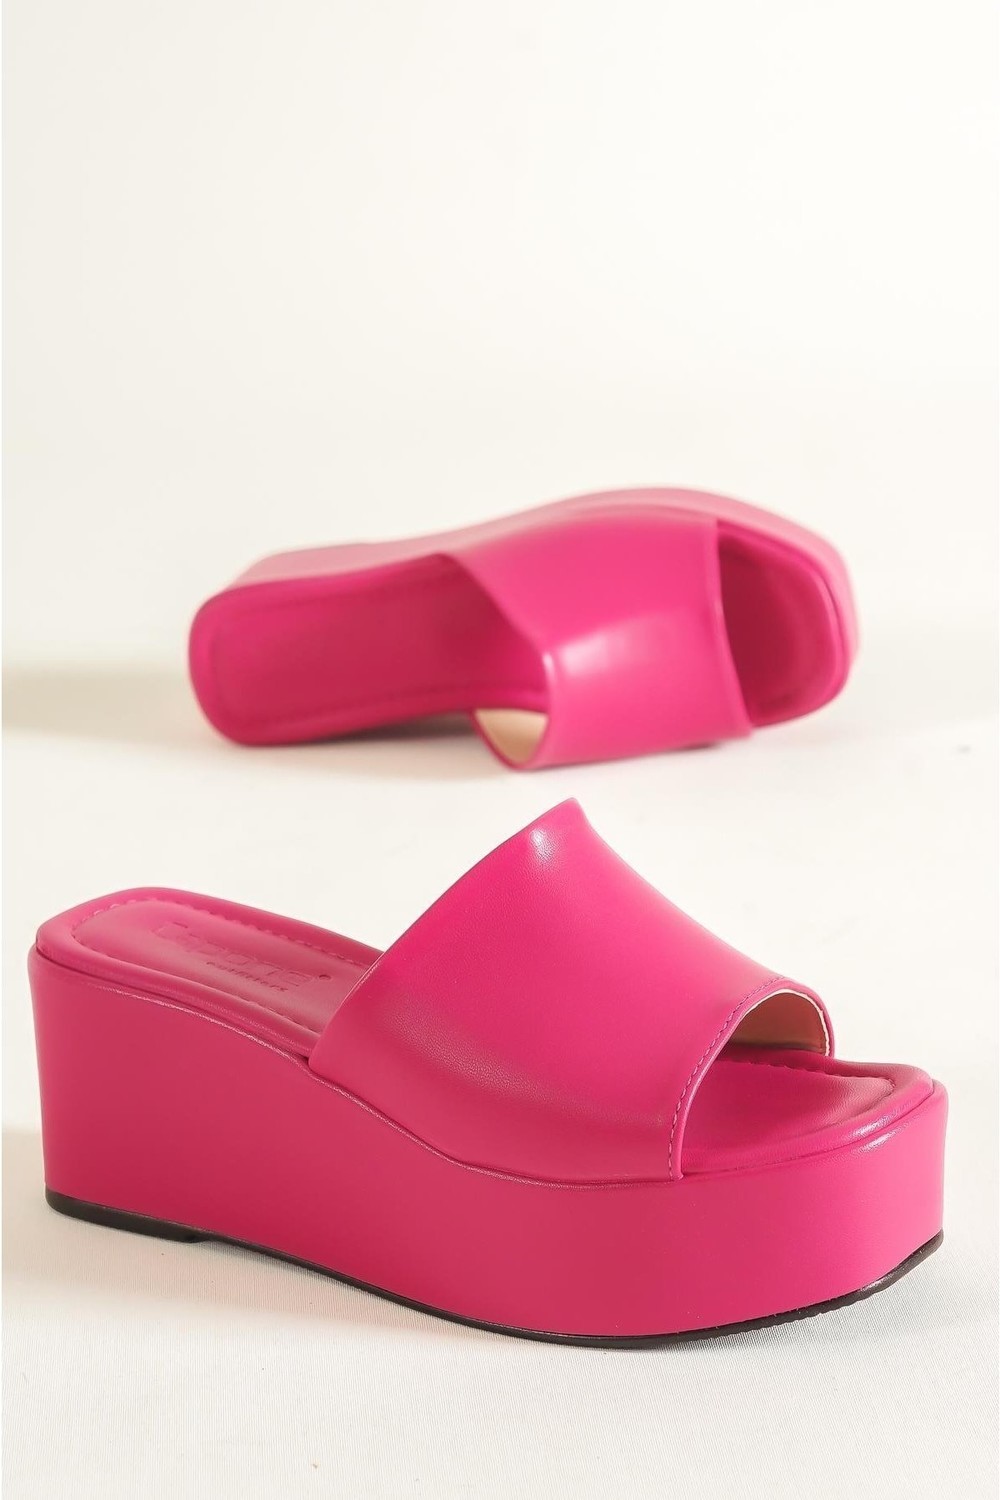 Capone Outfitters Mules - Pink - Wedge